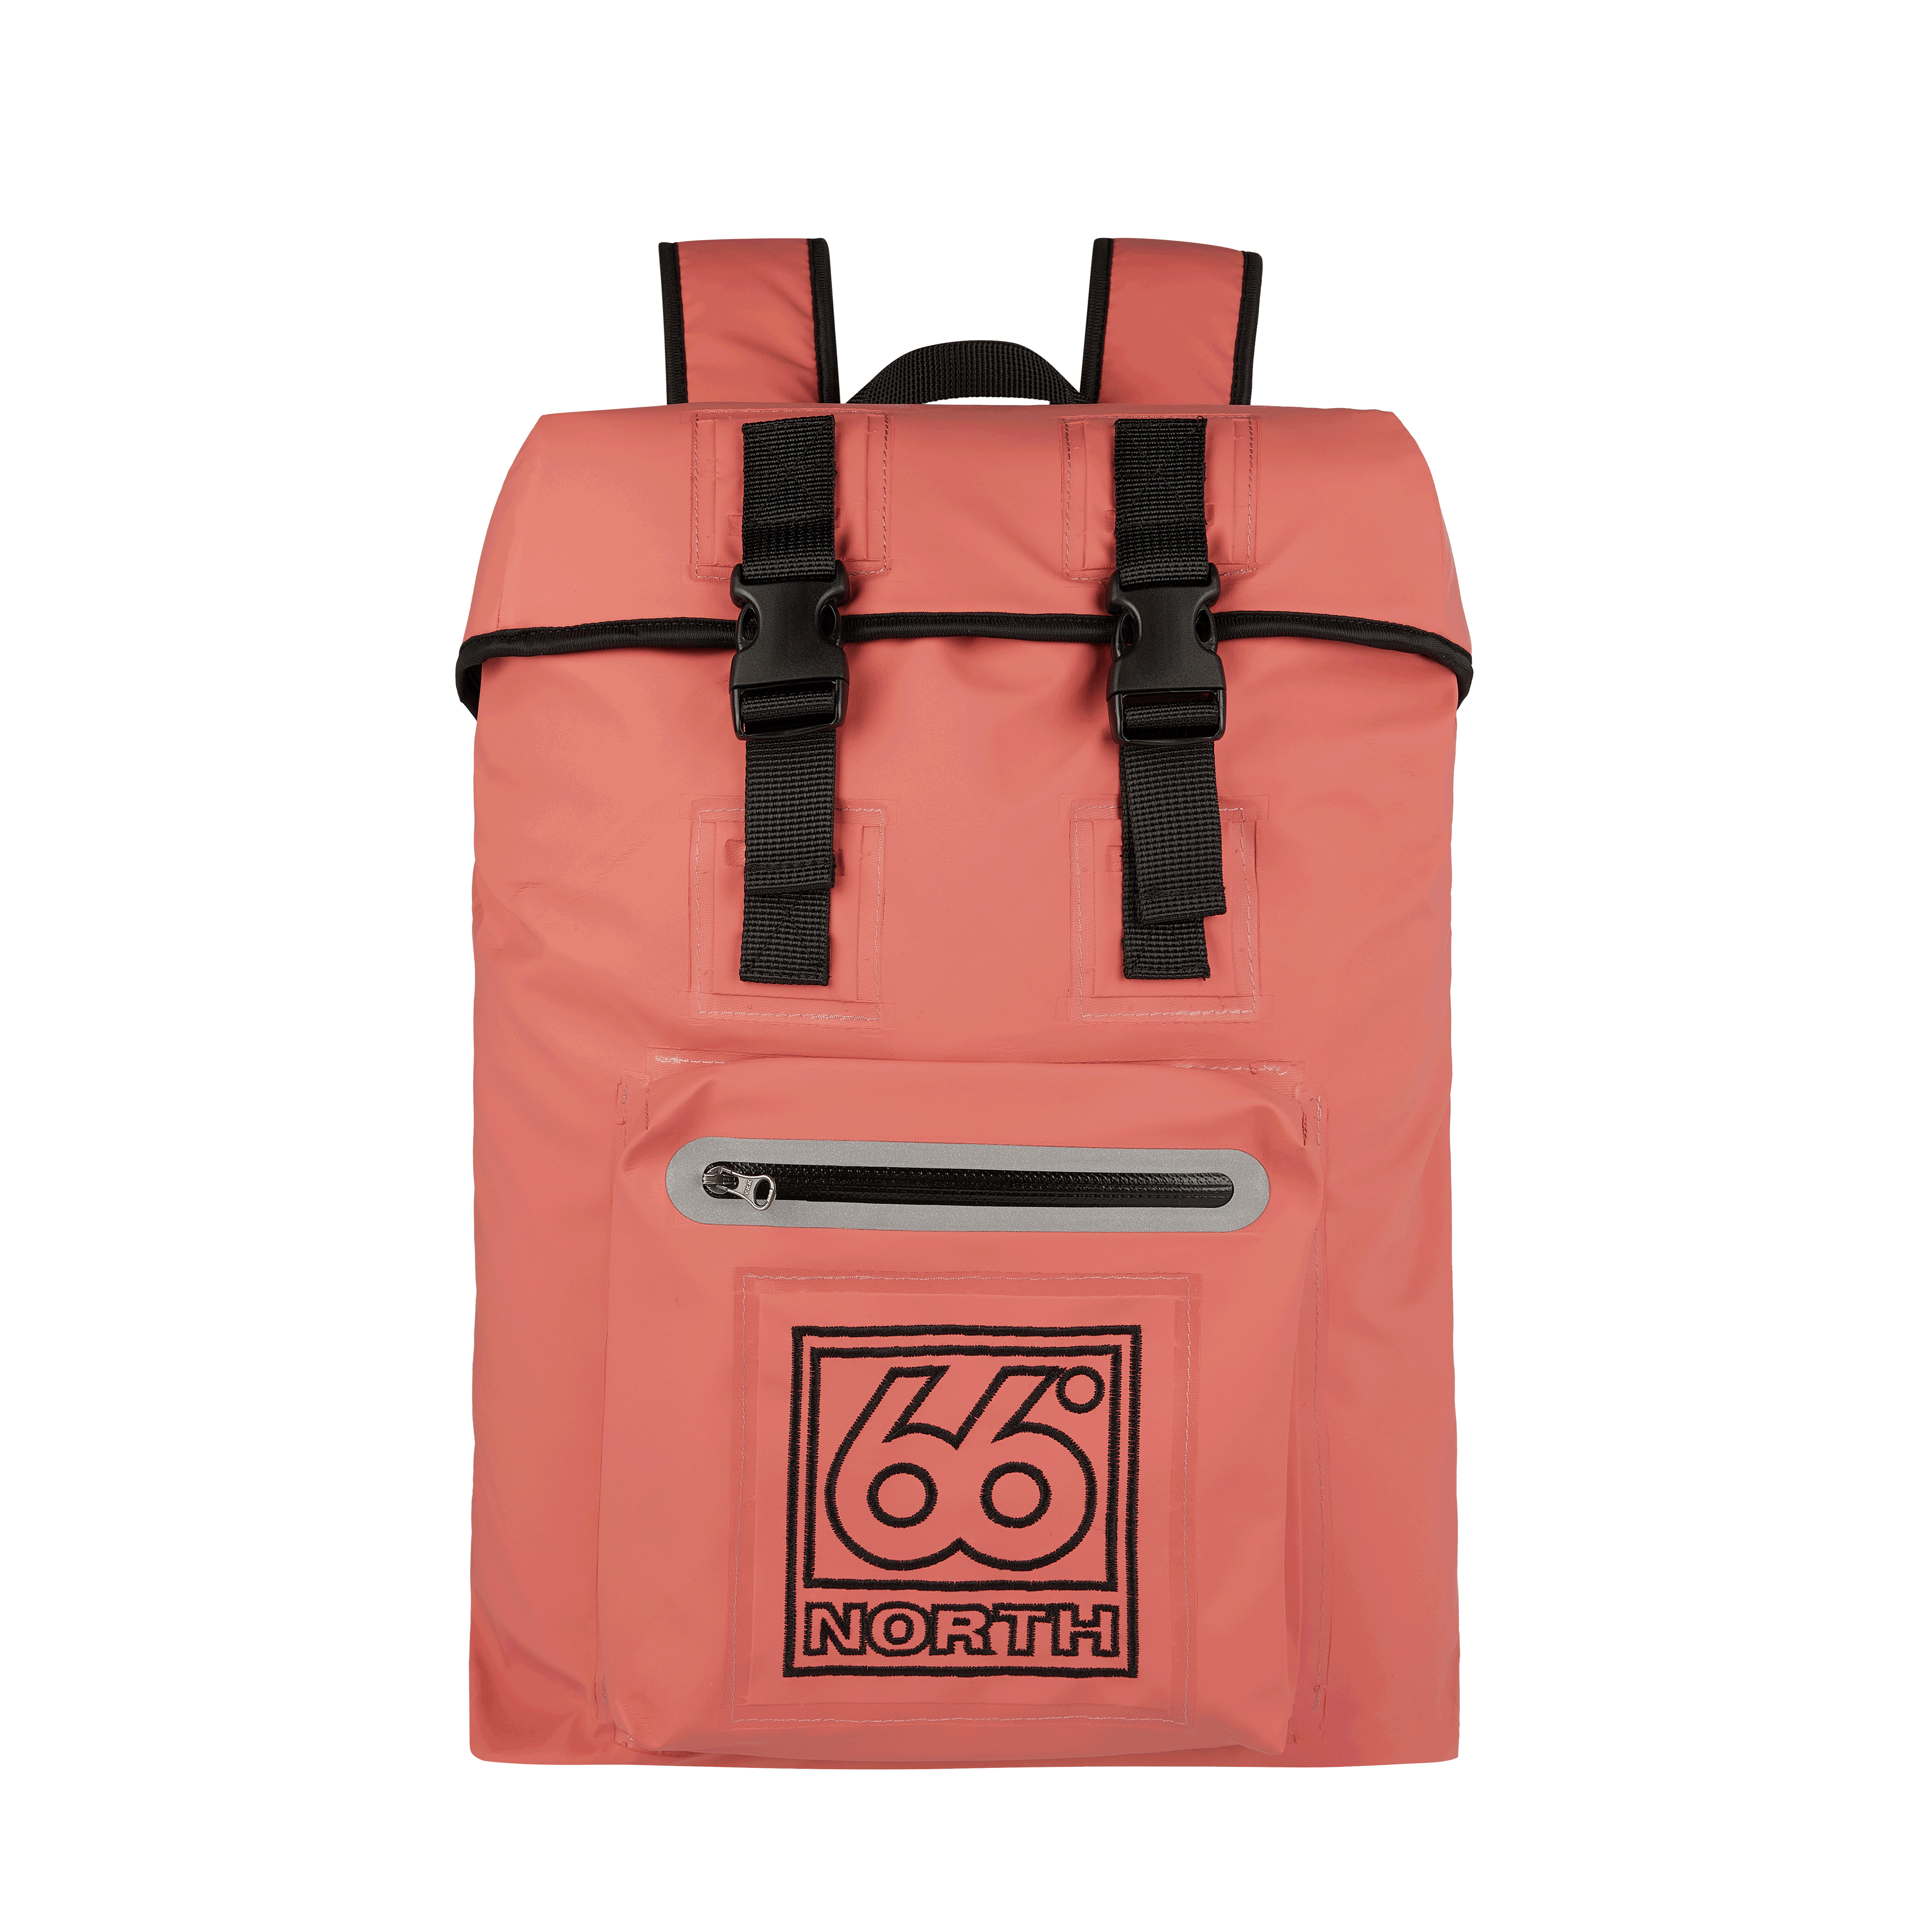 66 North Women's Backpack Accessories In Mars Sands